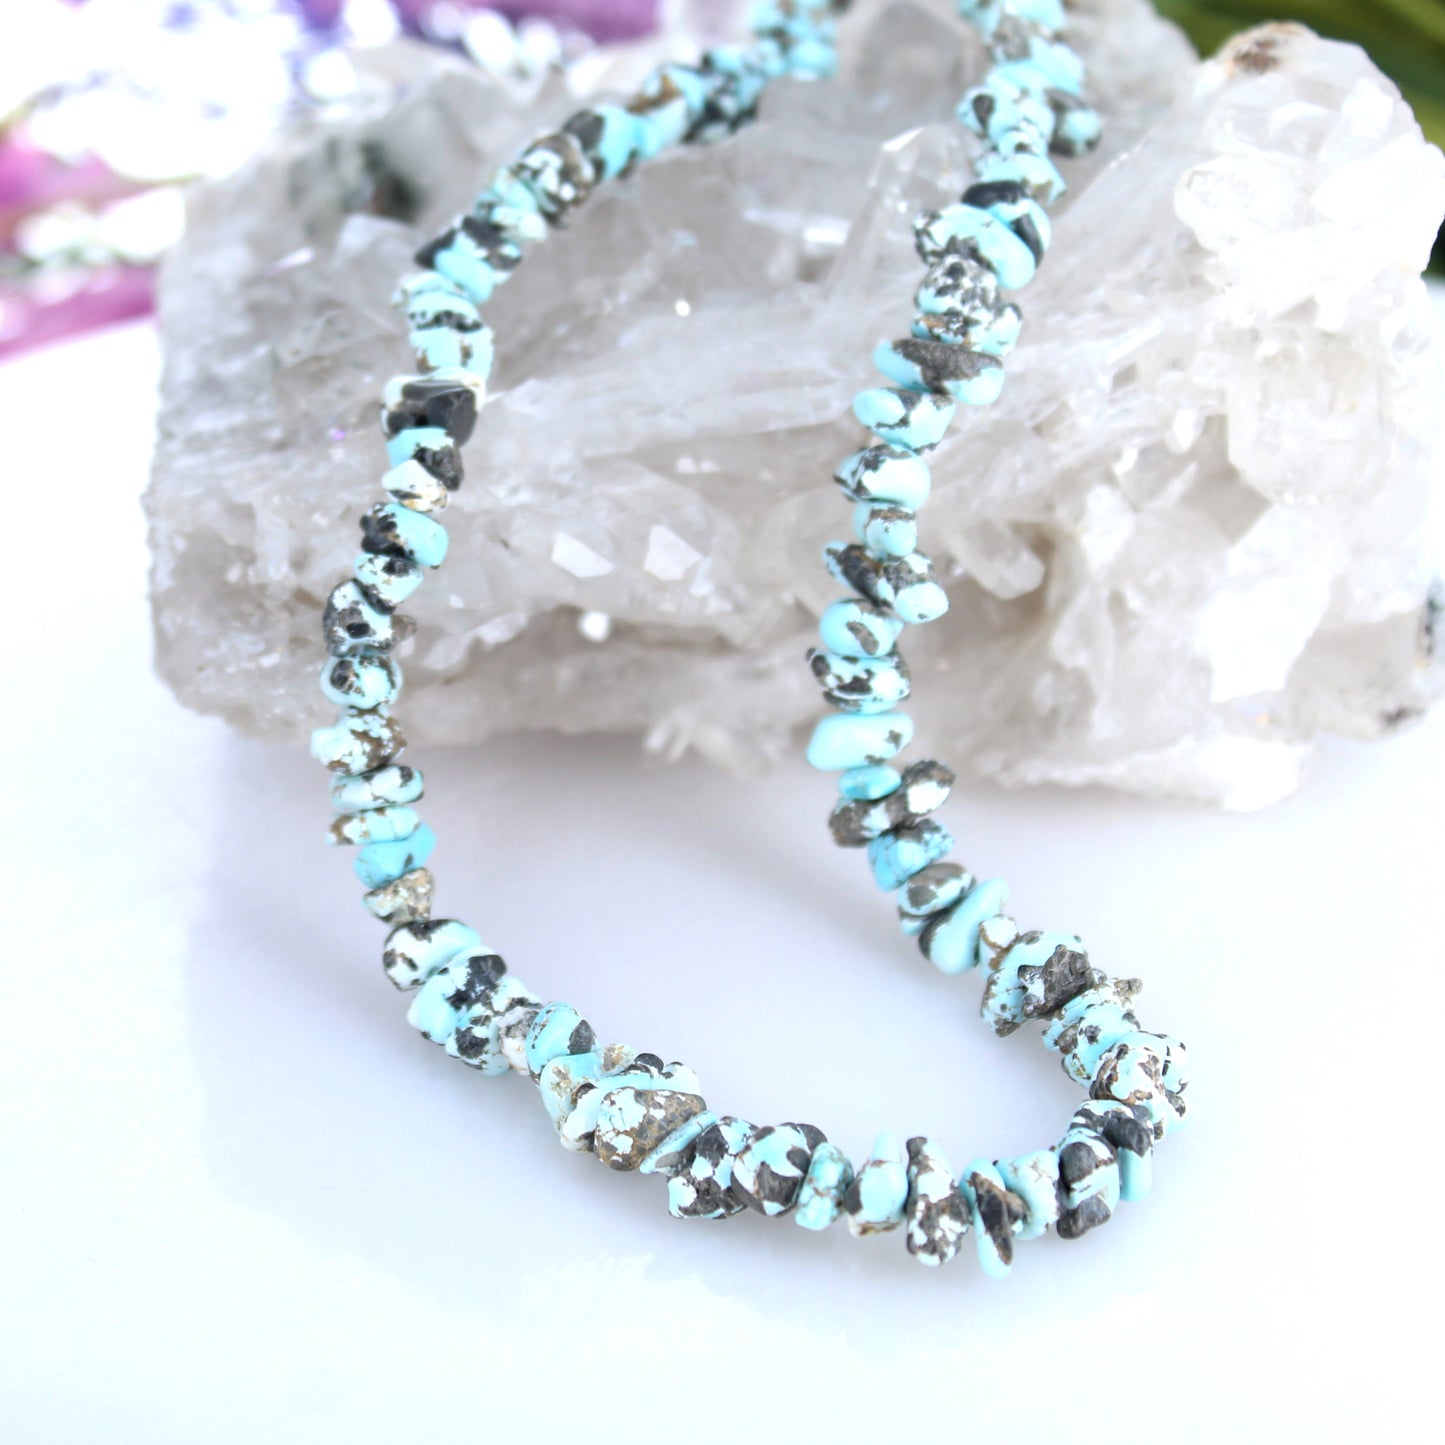 LONE MOUNTAIN Turquoise Beads 7-9mm Rocky Nugget Shape